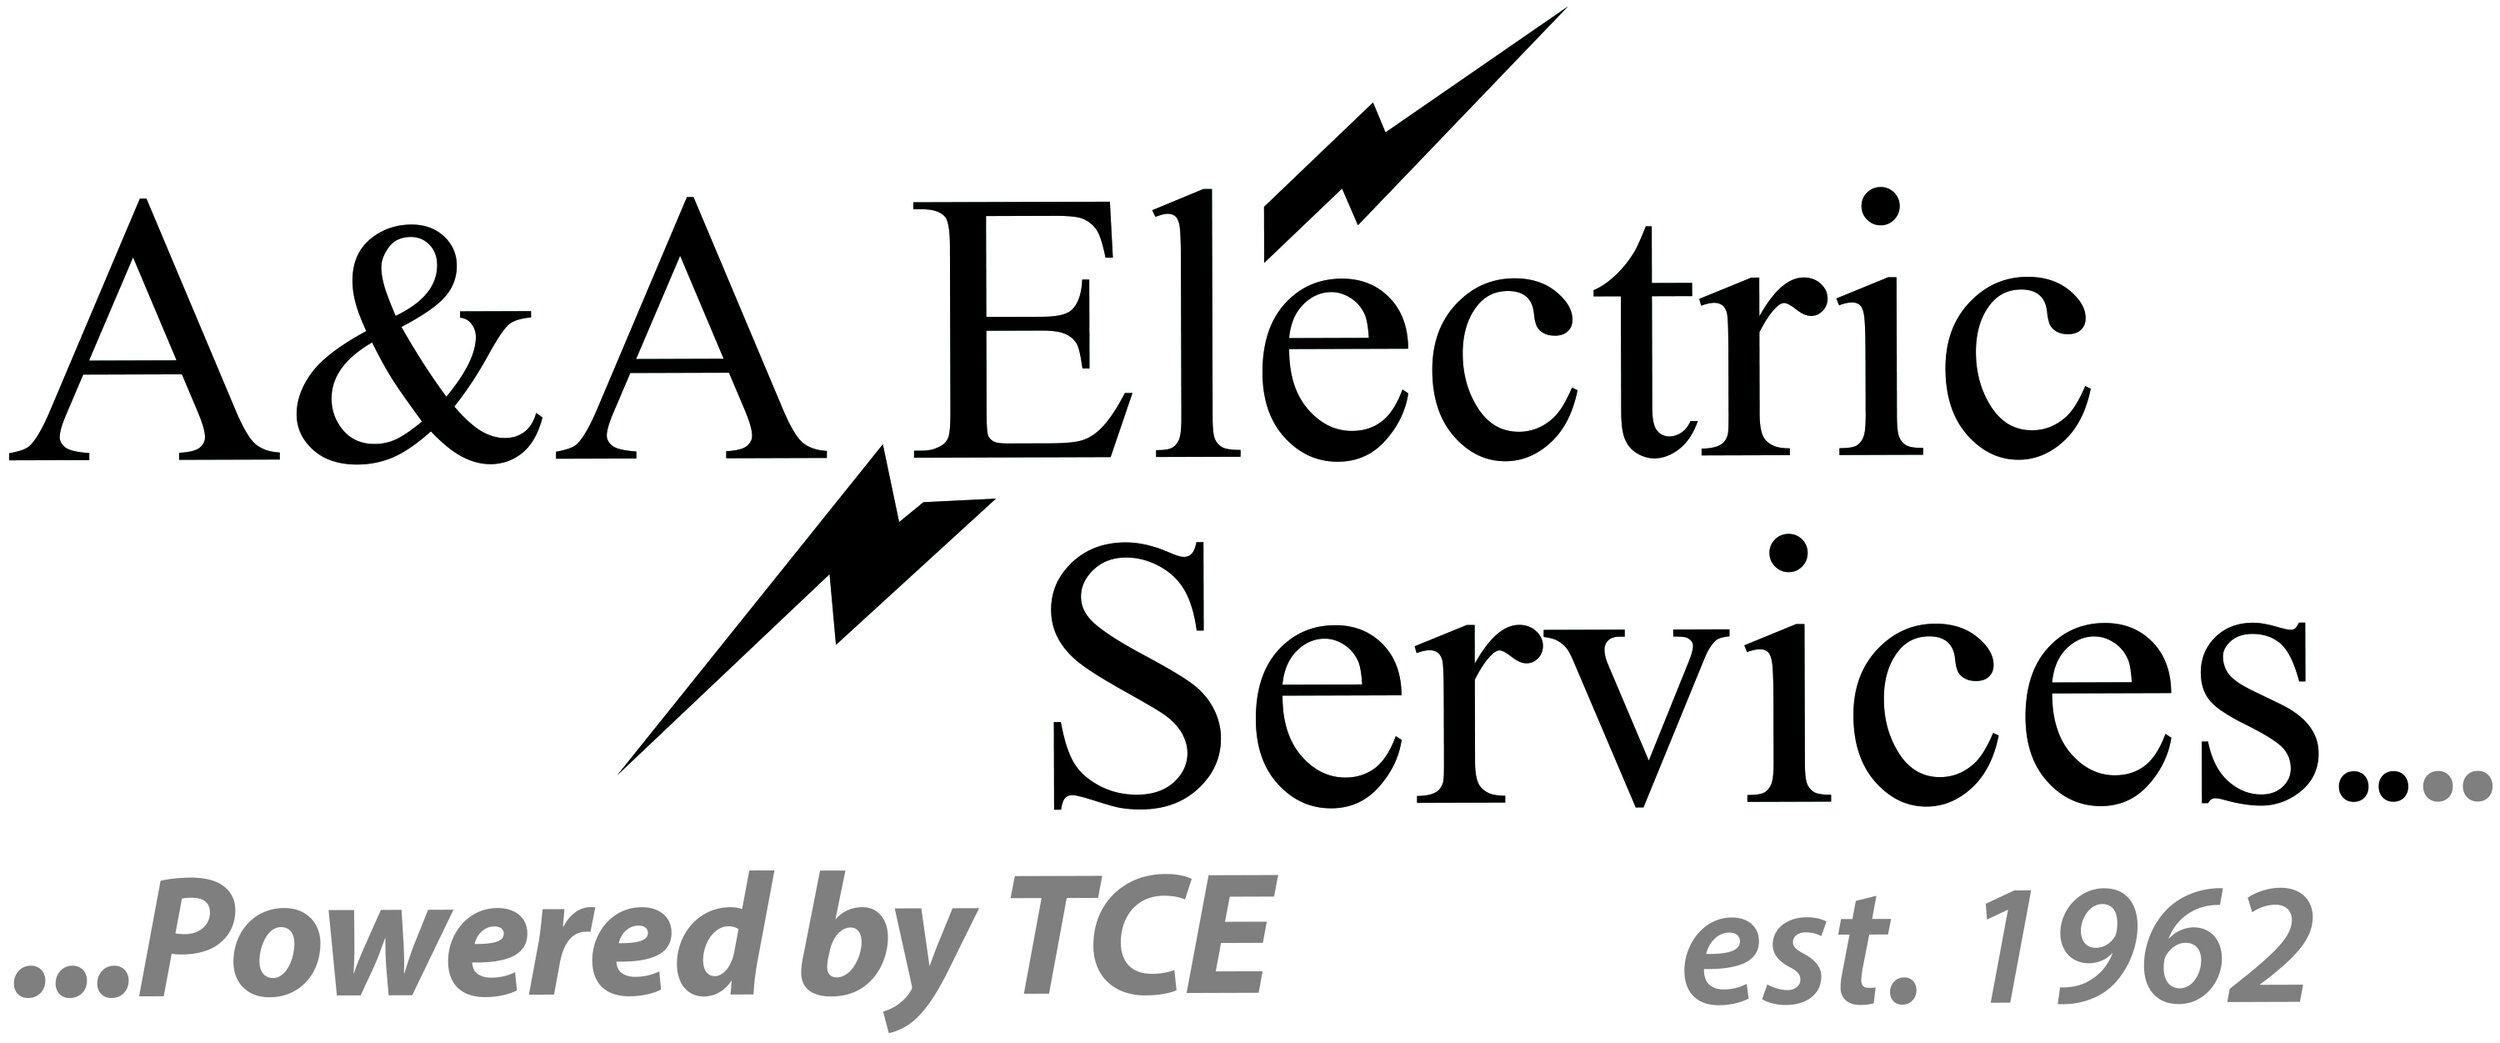 A&A Electric Services